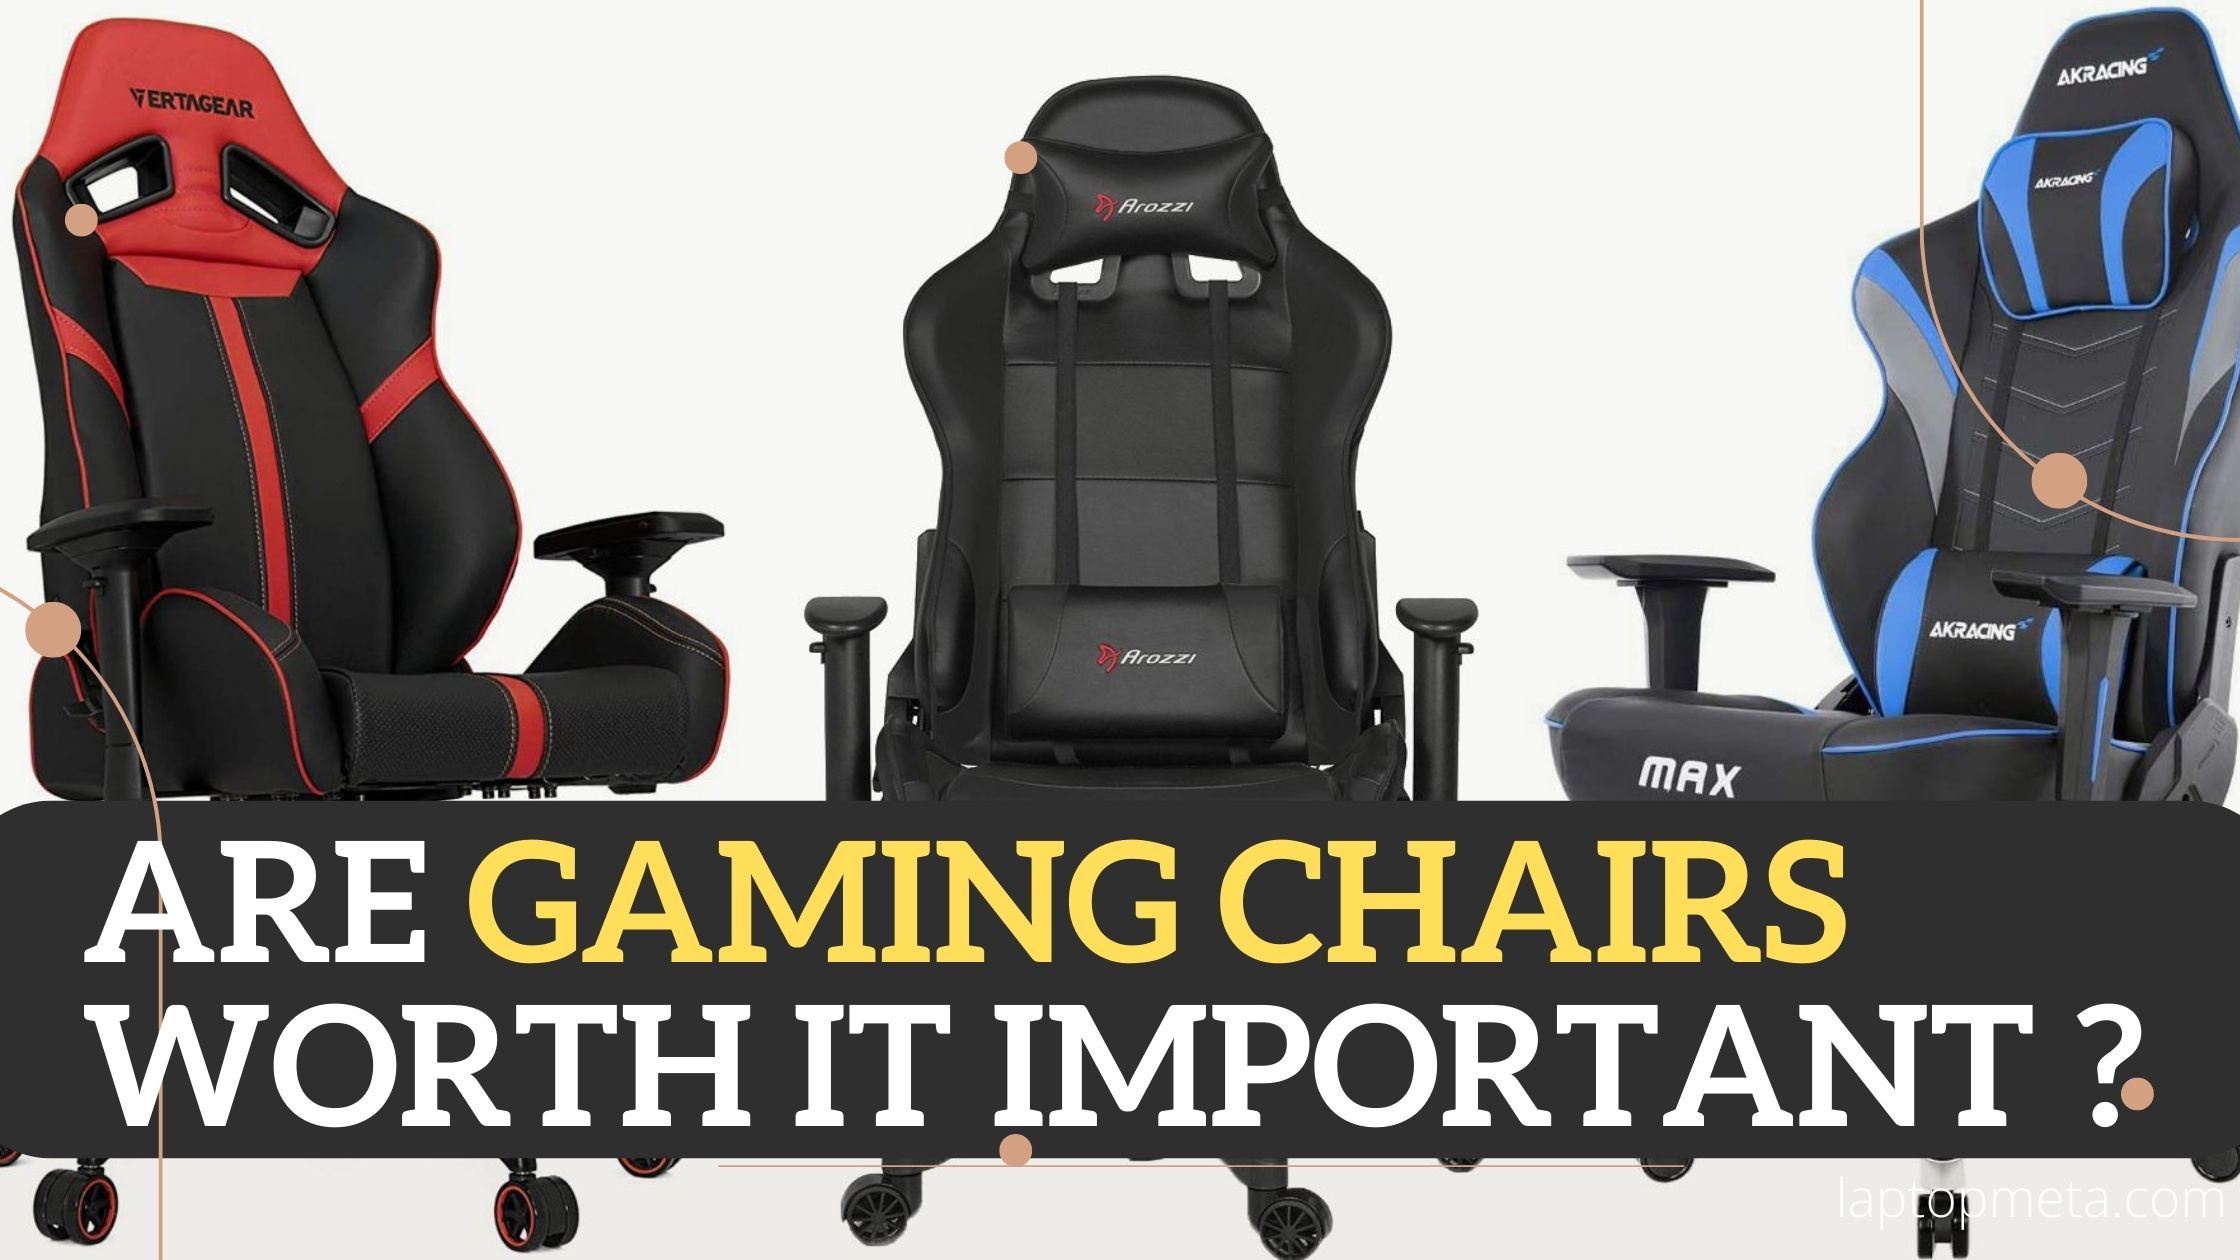 Are Gaming Chairs Worth it important